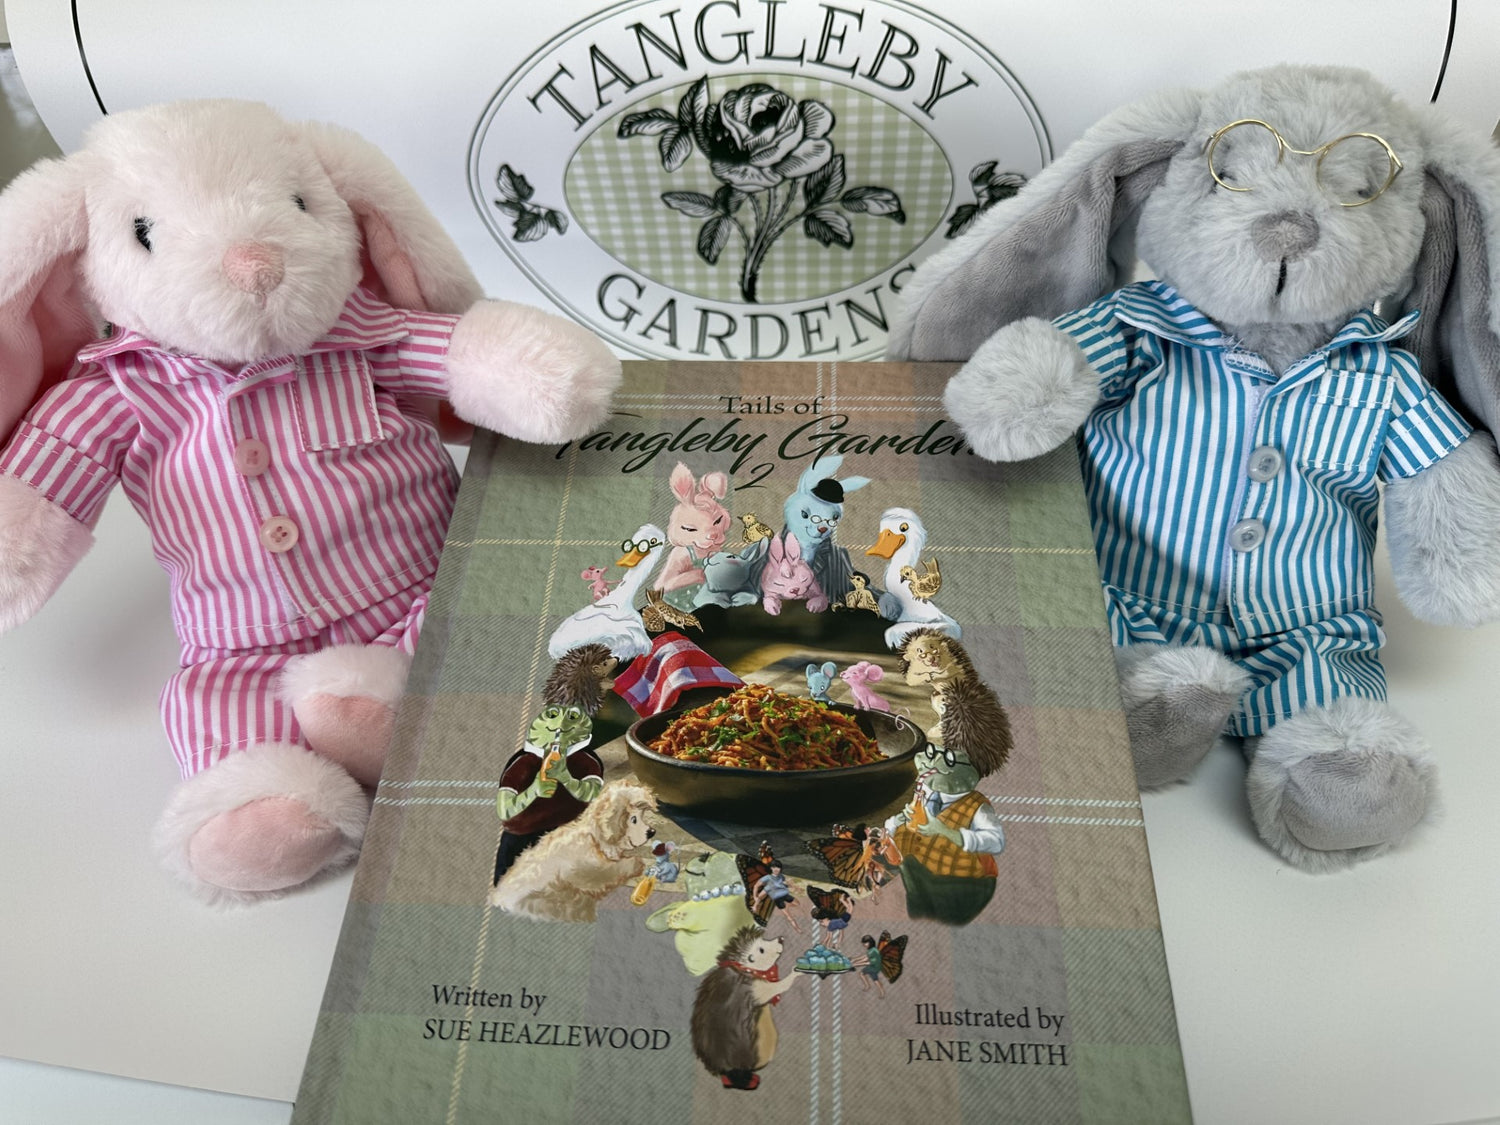 Characters from the Tails of Tangleby gardens series